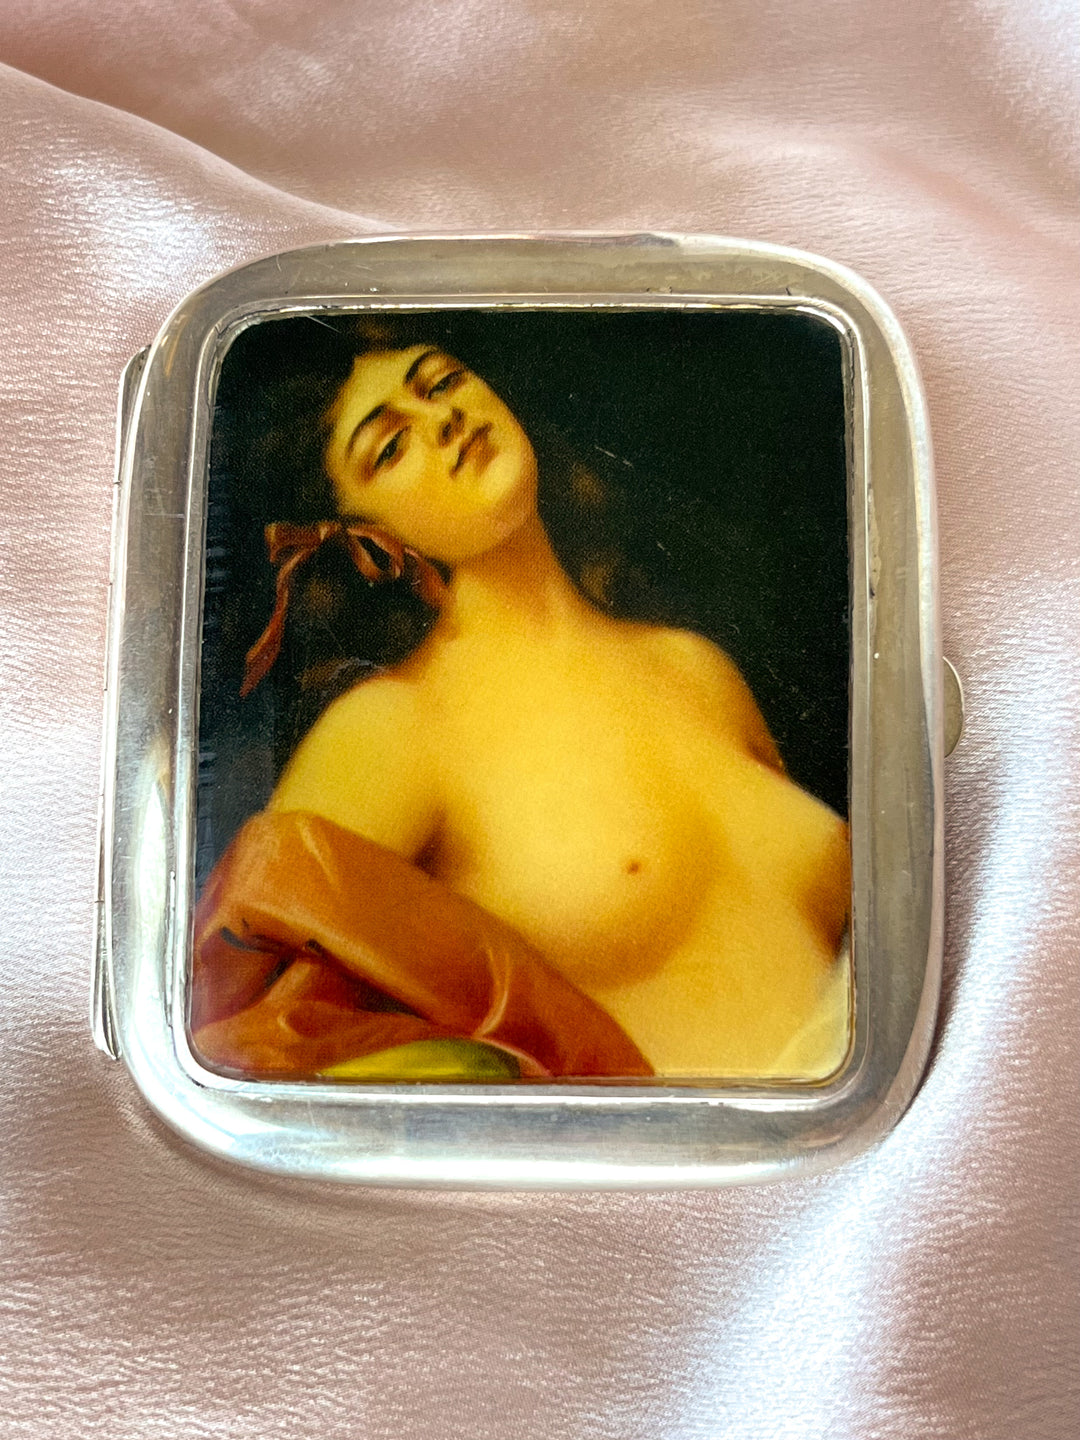 Striking Sterling Silver Cigarette Compact C. 1905